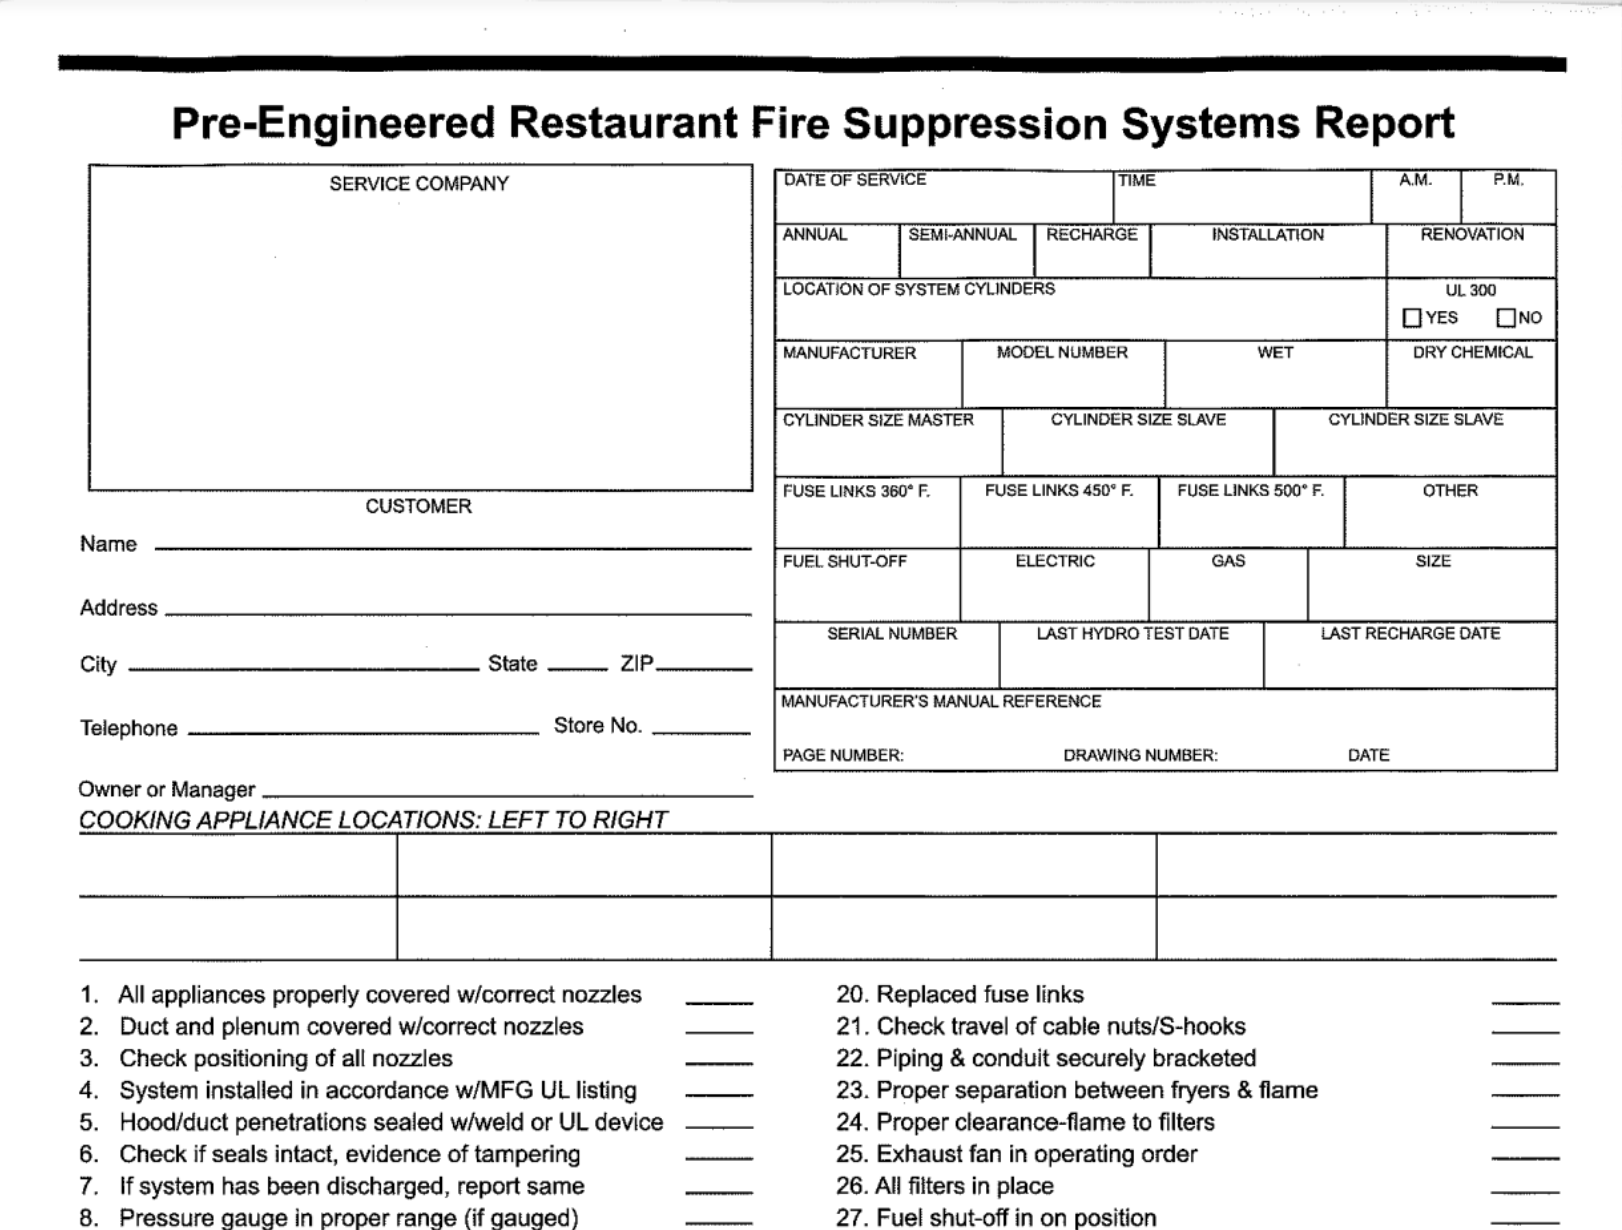 Pre-Engineered Restaurant Fire Suppression System Report mobile tablet PDF